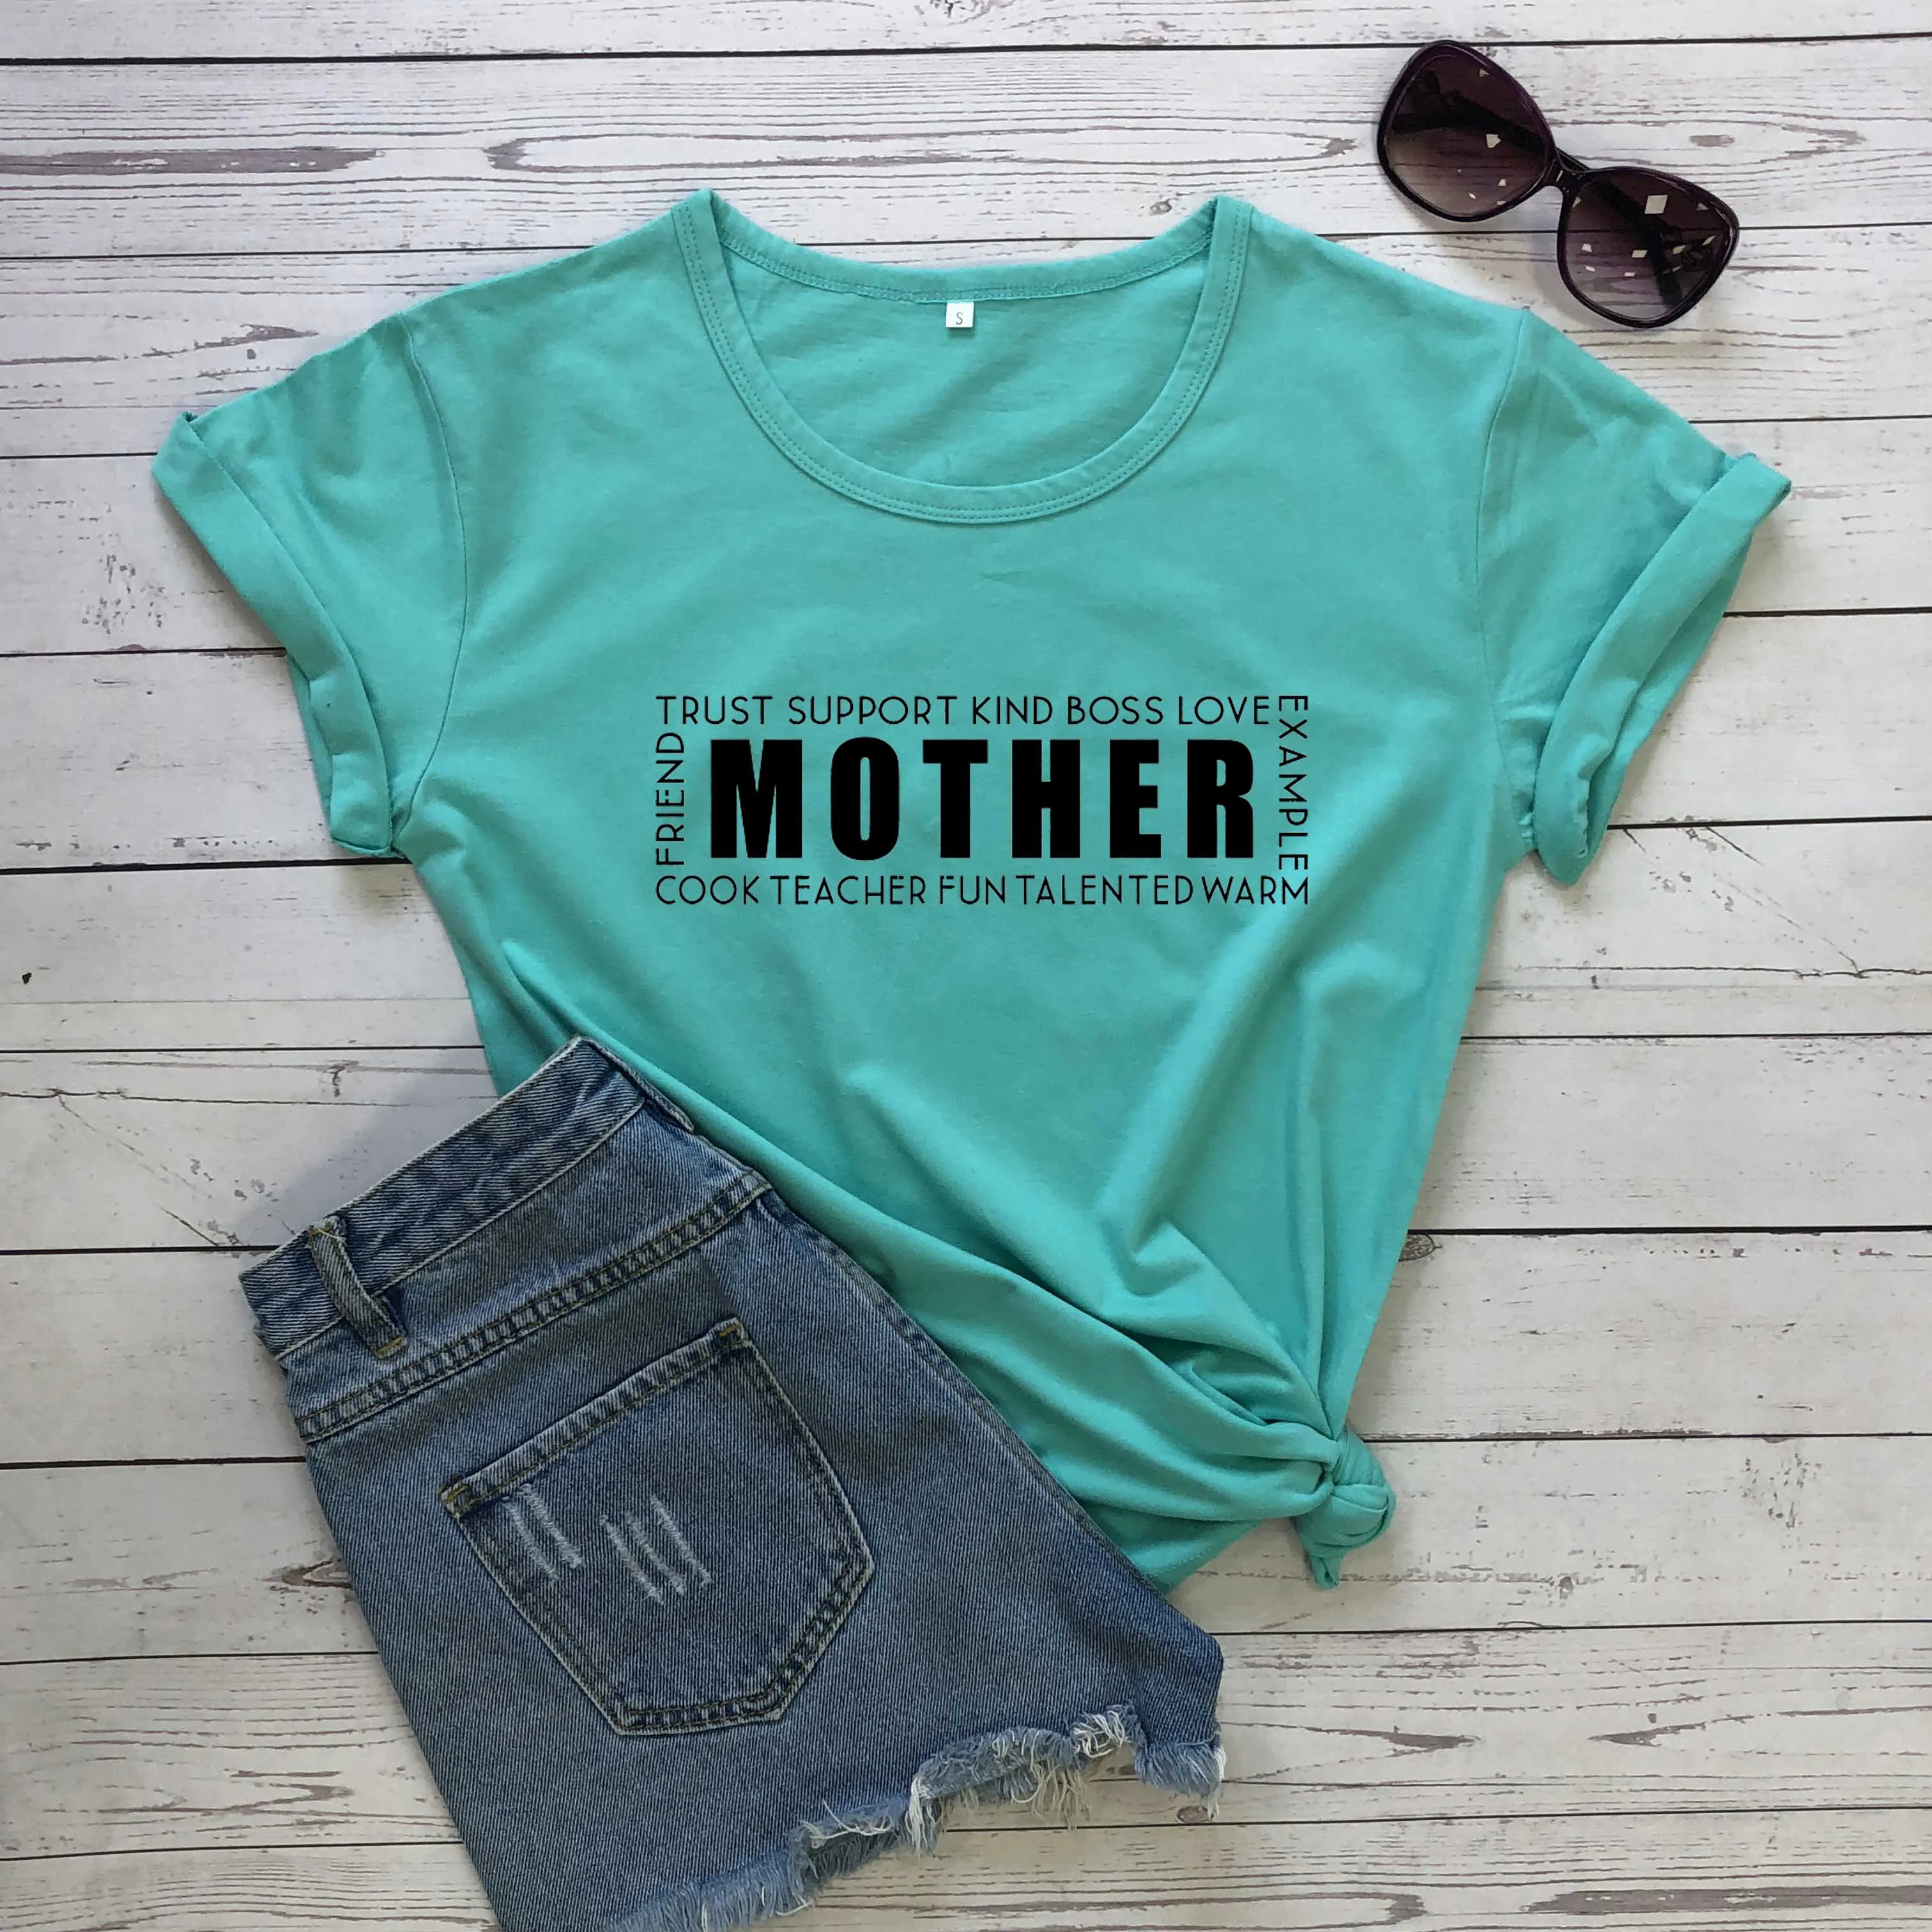 

Mother's Day slogan quote women fashion pure cotton casual hipster vintage grunge tumblr youngs 90s t shirt street style tops